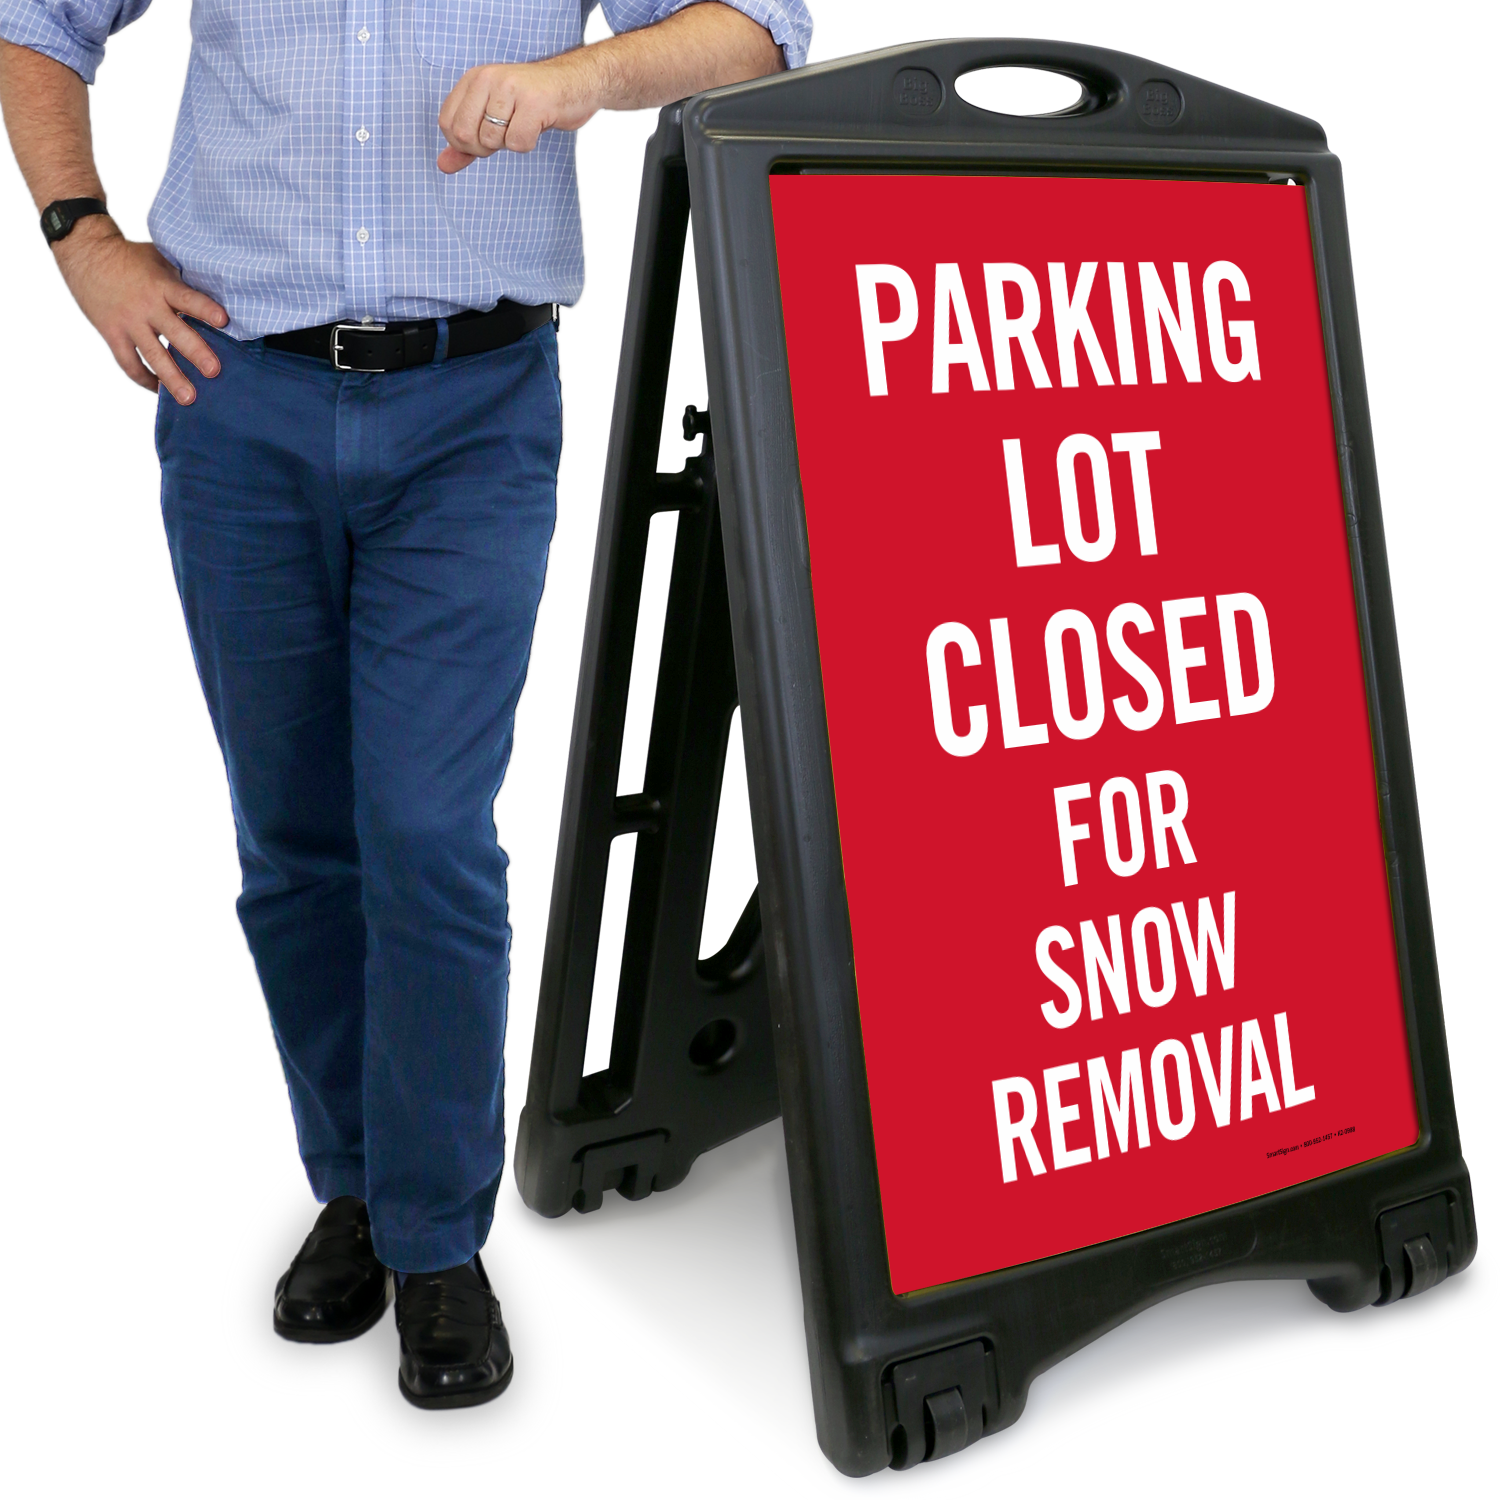 0001 Private Parking Residents Only In Red High Quality Correx Plastic Sign